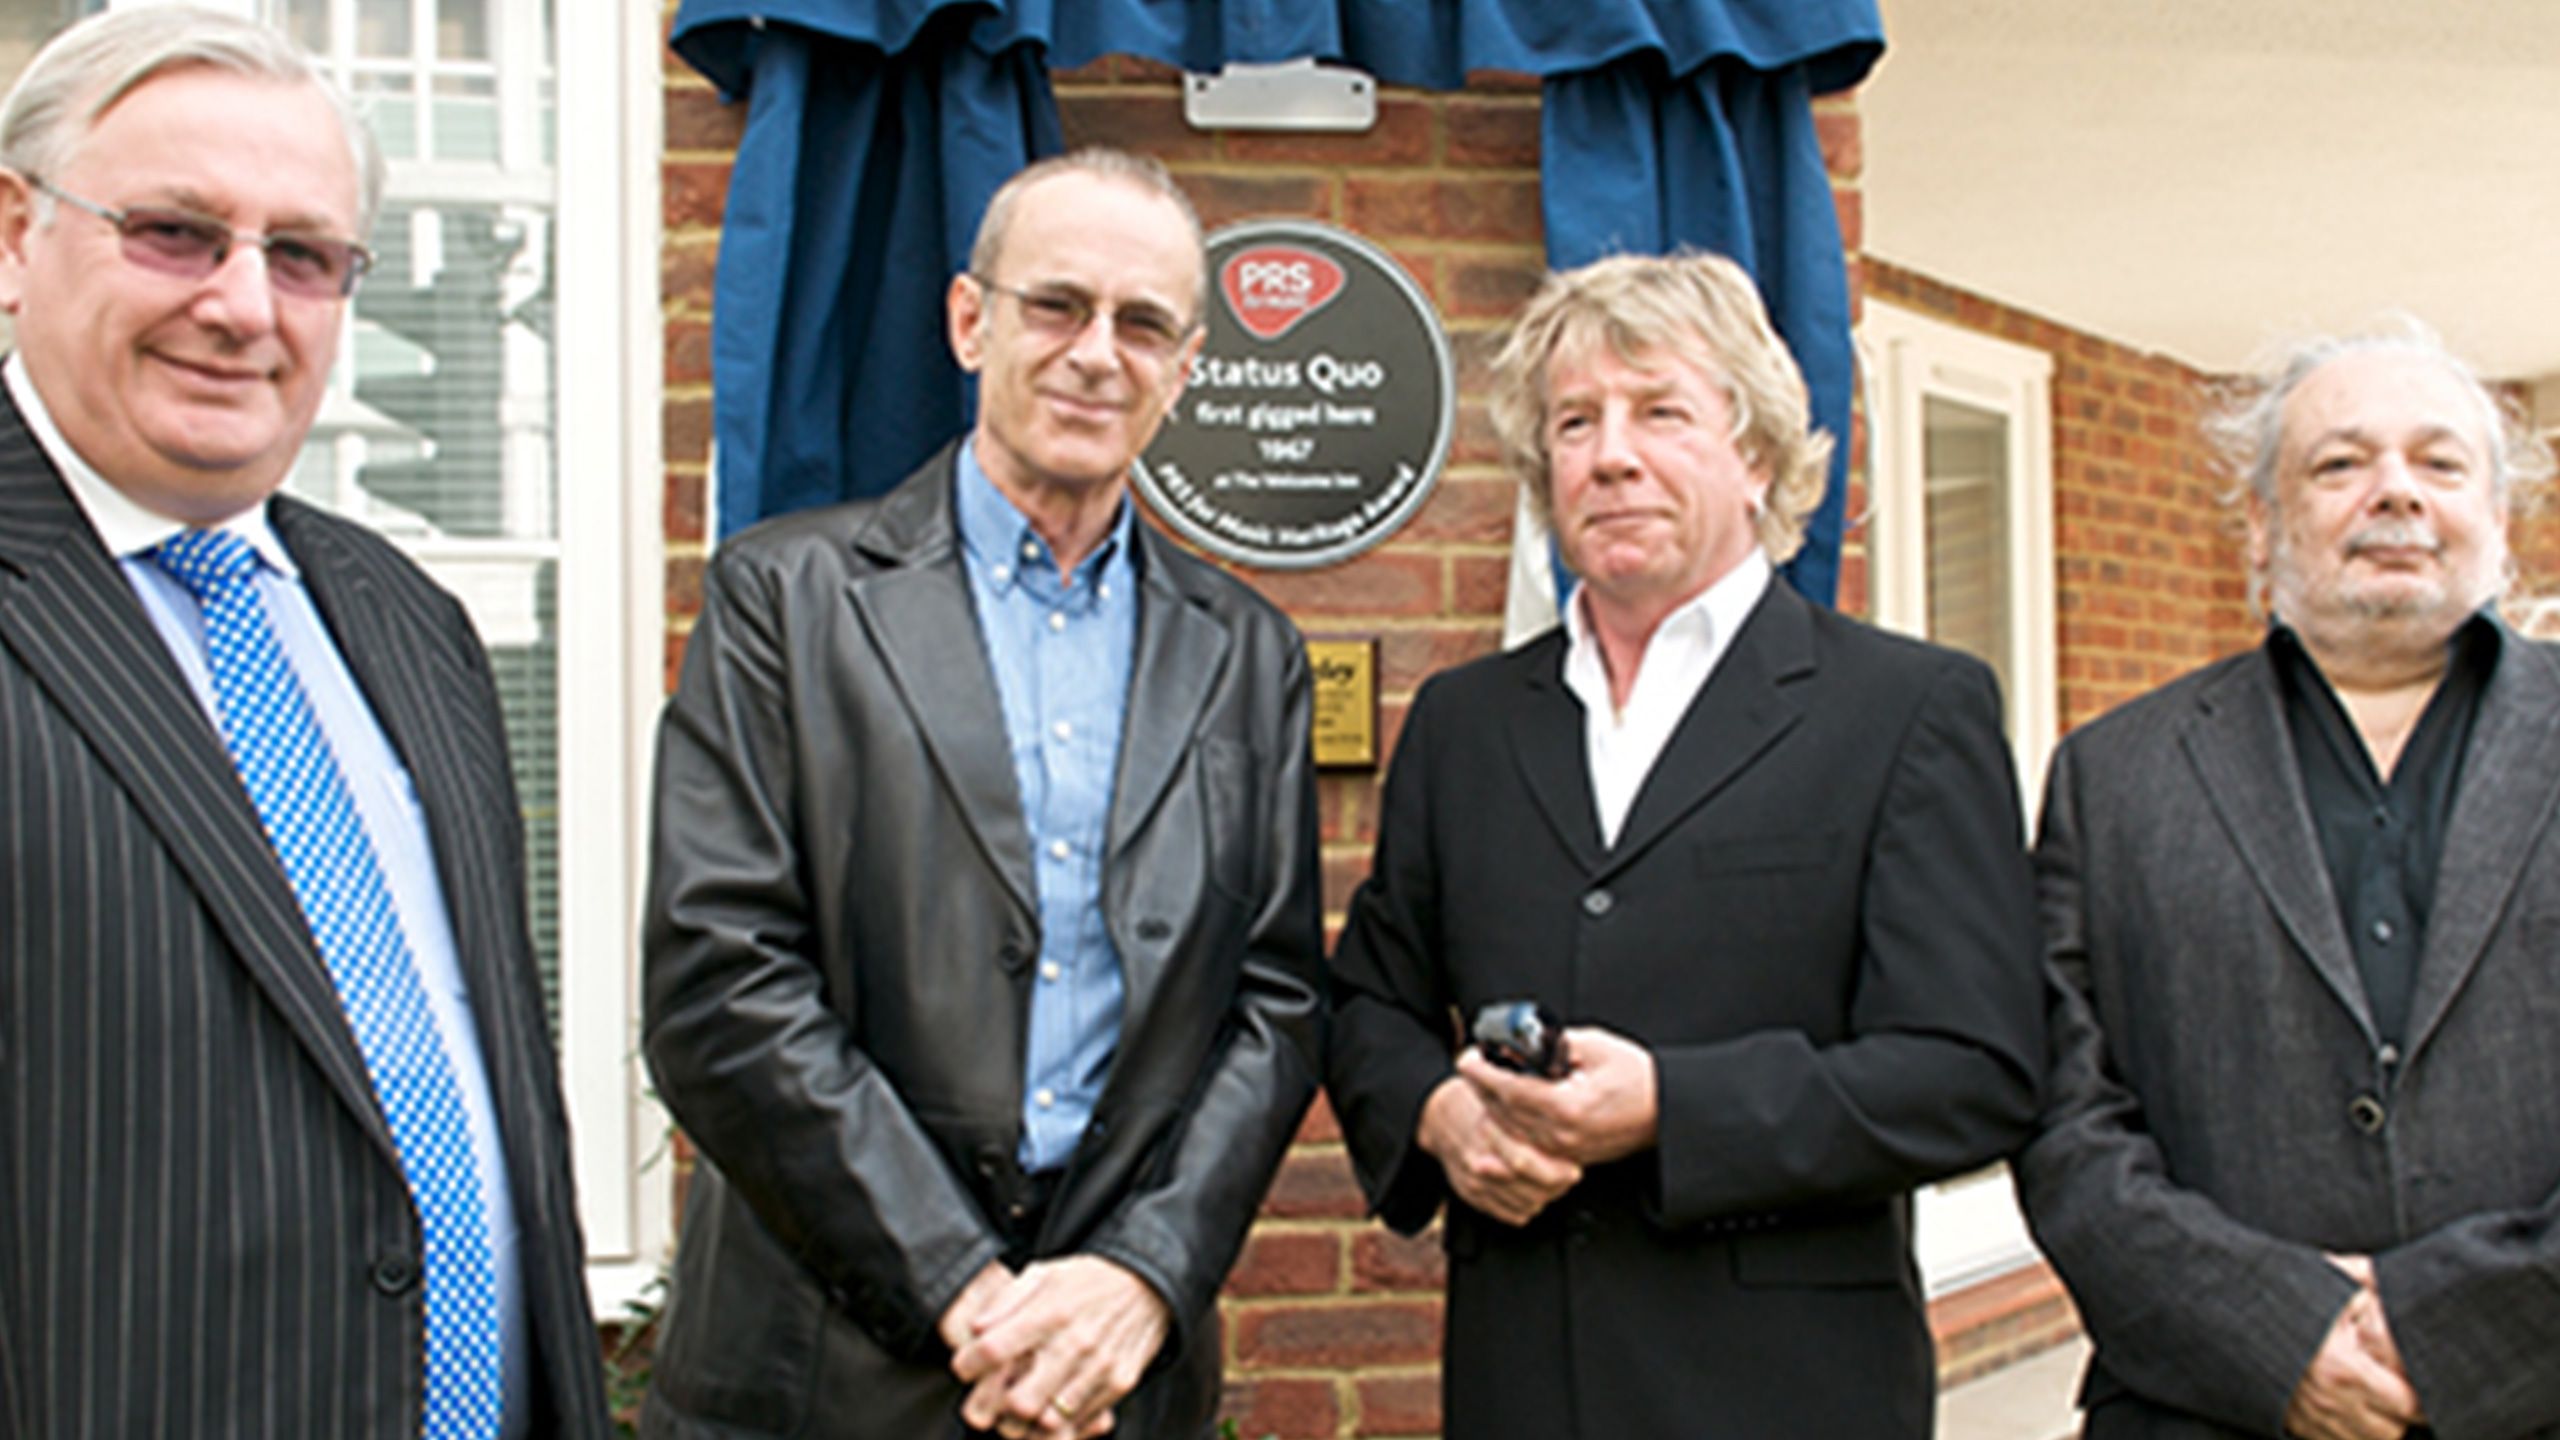 Status Quo presented PRS for Music Heritage award